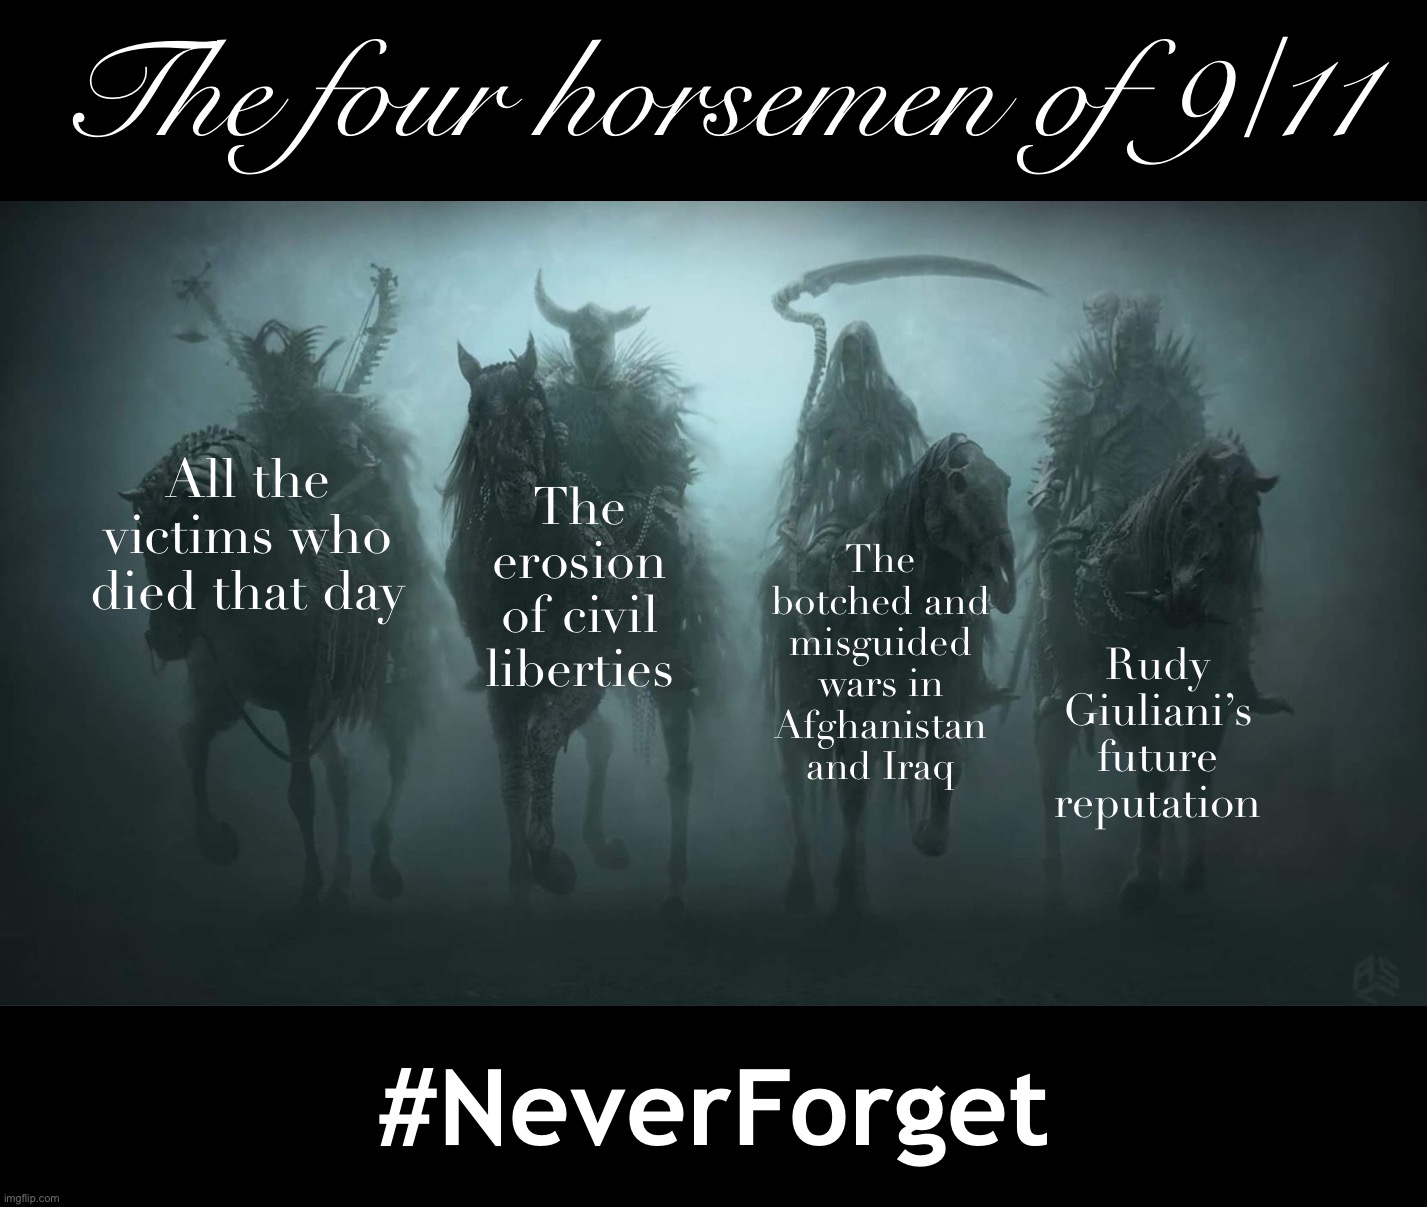 unfashionably late 9/11 moment of silence | The four horsemen of 9/11; All the victims who died that day; The erosion of civil liberties; The botched and misguided wars in Afghanistan and Iraq; Rudy Giuliani’s future reputation; #NeverForget | image tagged in four horsemen fixed textboxes,9/11,j,o,k,e | made w/ Imgflip meme maker